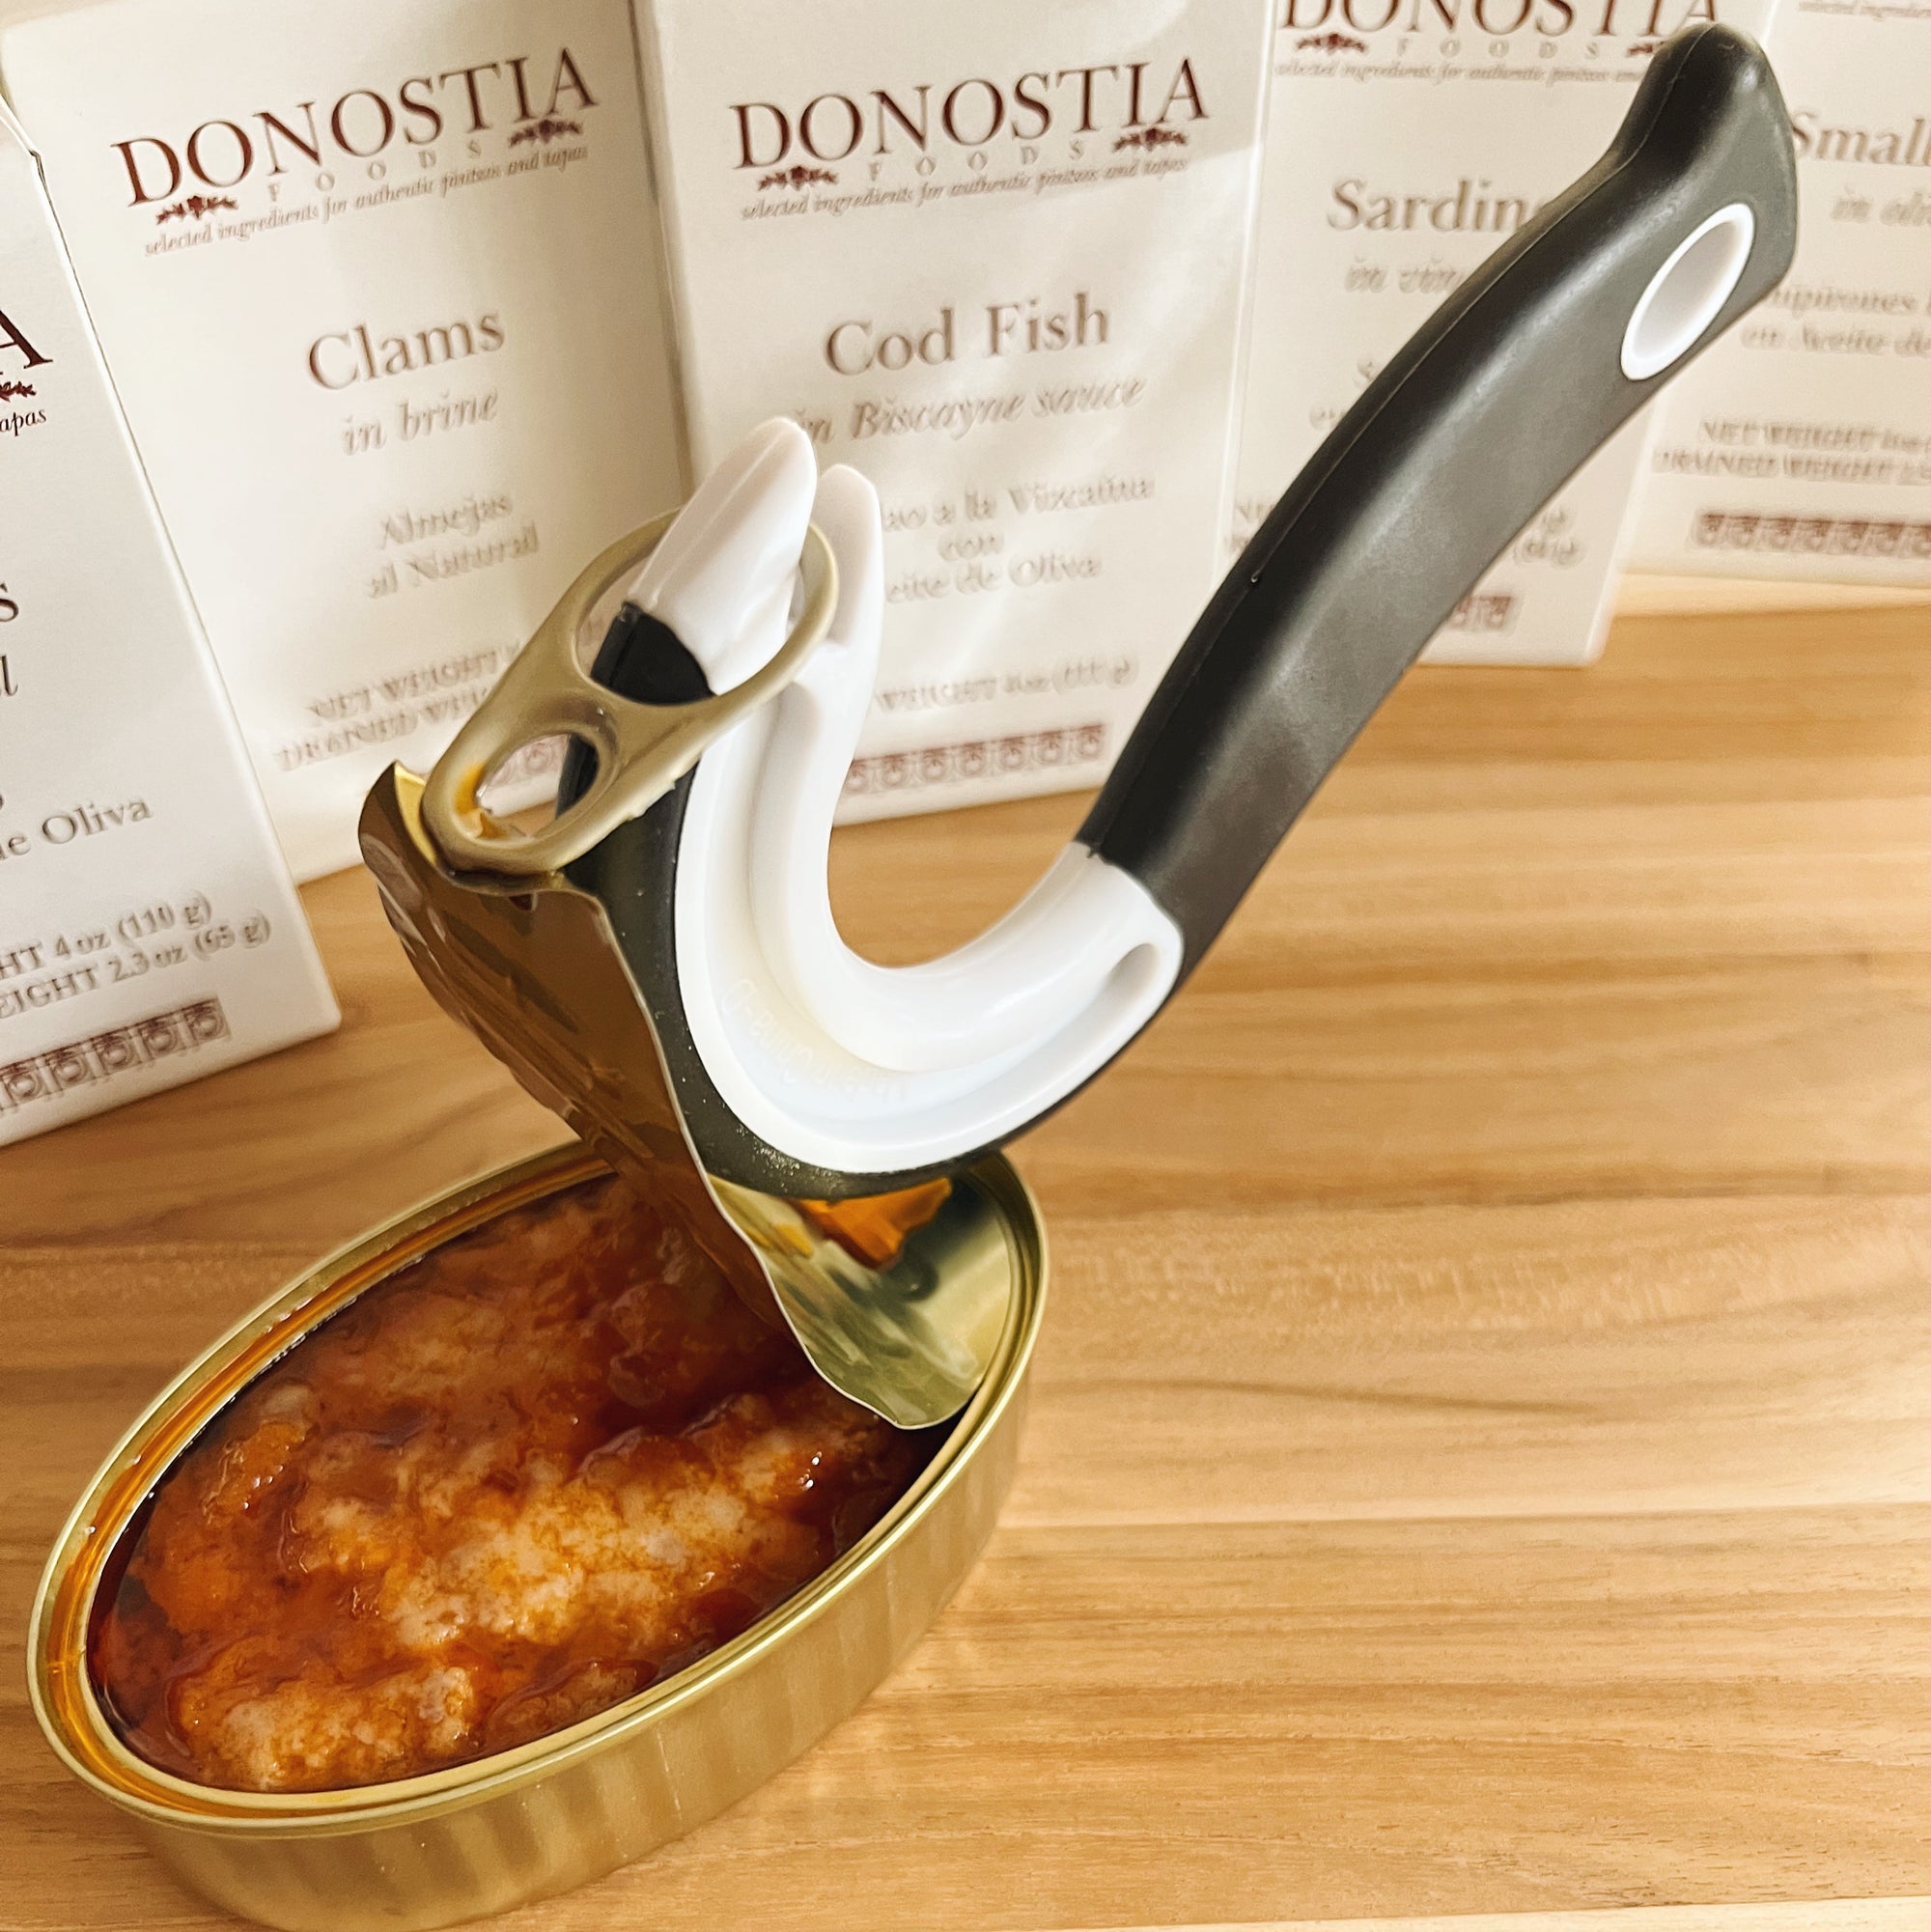 Easy pull can opener opening a tin of Donostia Foods Cod Fish in Biscayne Sauce